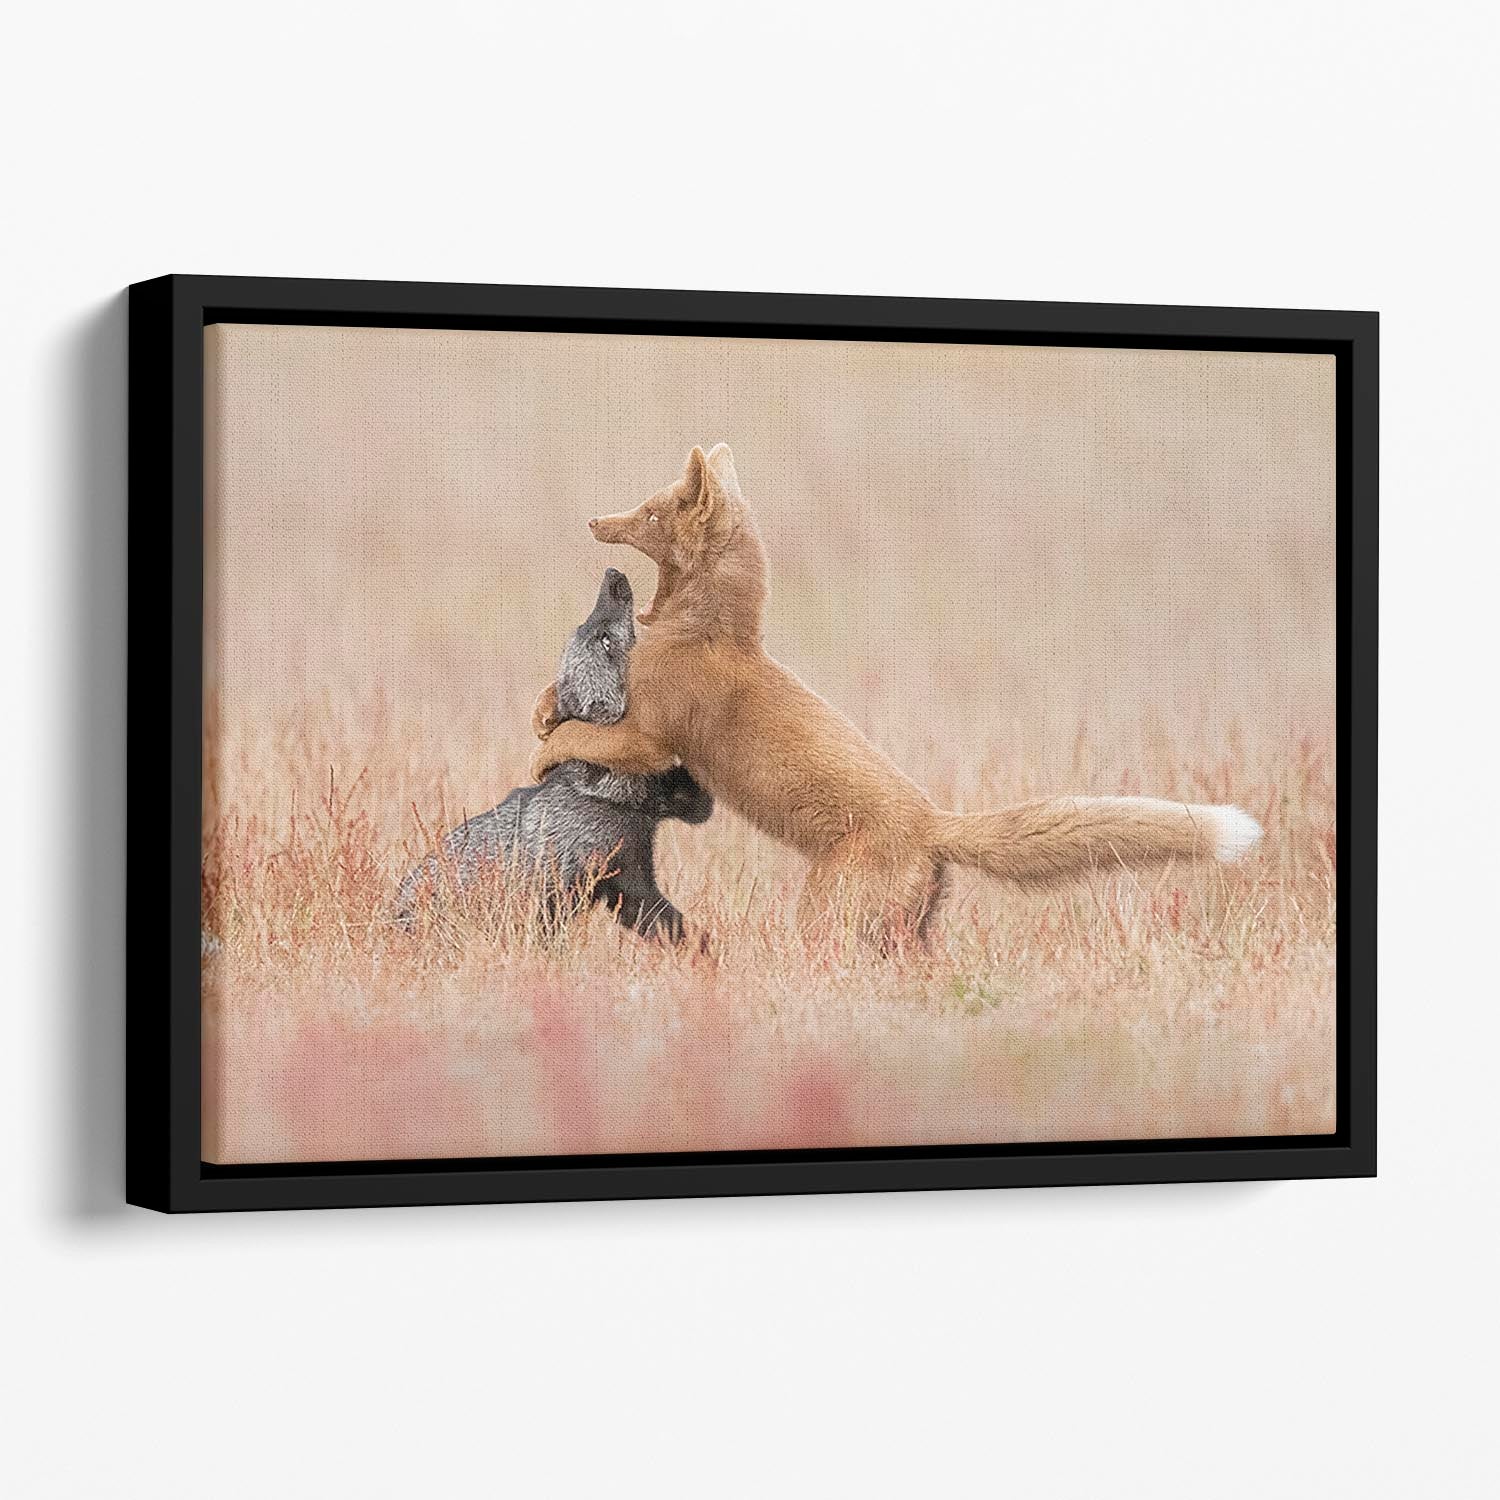 Two Foxes Playing In The Grass Floating Framed Canvas - Canvas Art Rocks - 1